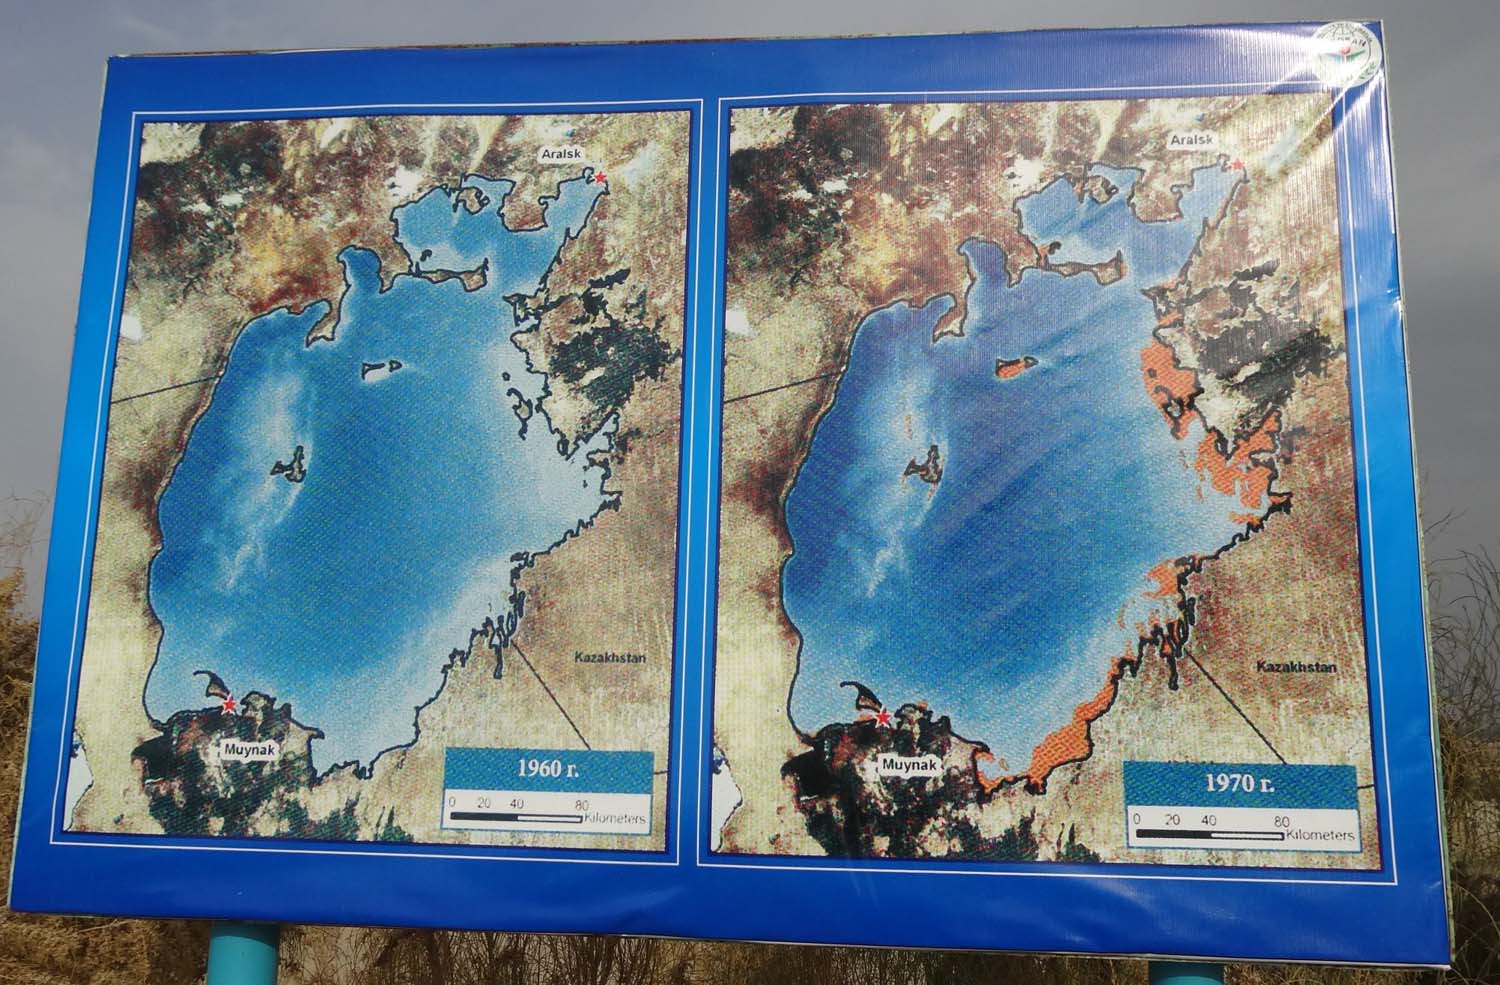 in 1960 the Aral Sea was still completely full, you can already see the start of the disappearance by 1970